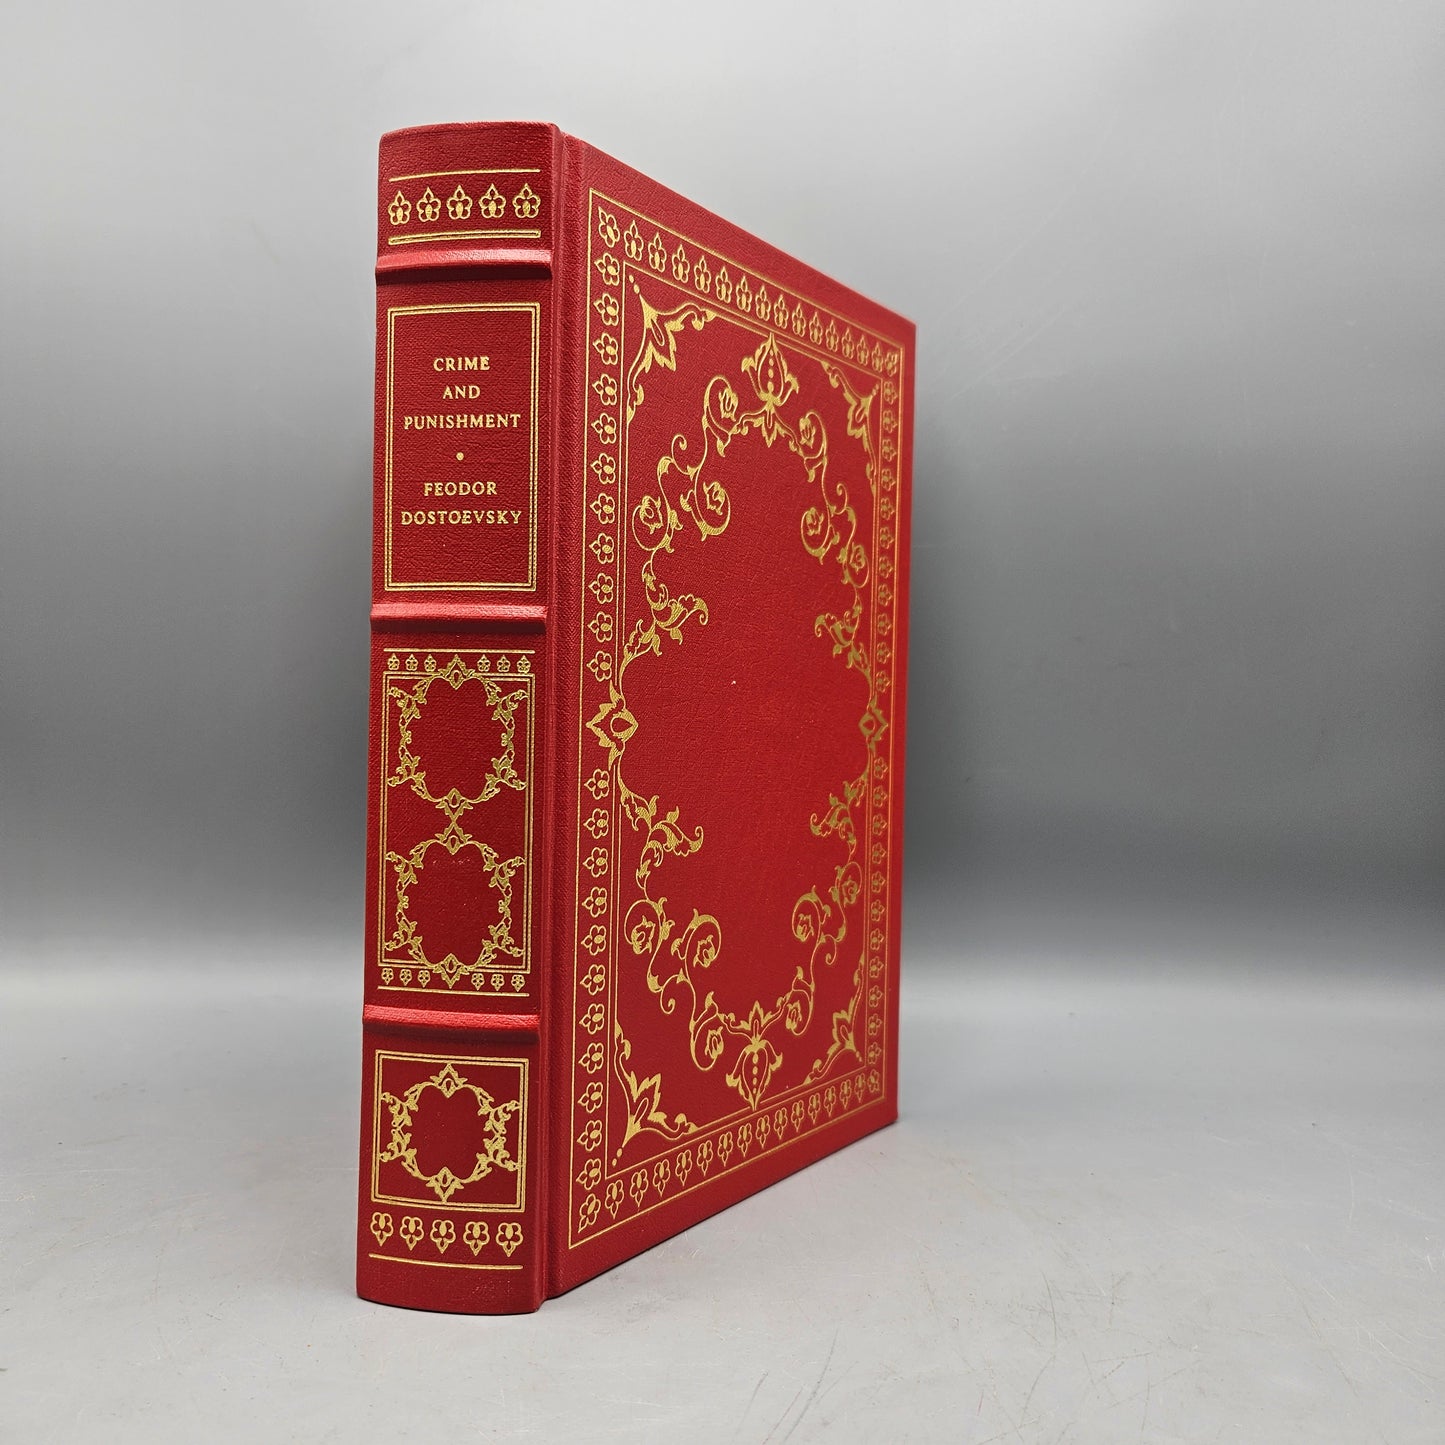 Leatherbound Book - Dostoevsky "Crime and Punishment" Franklin Library